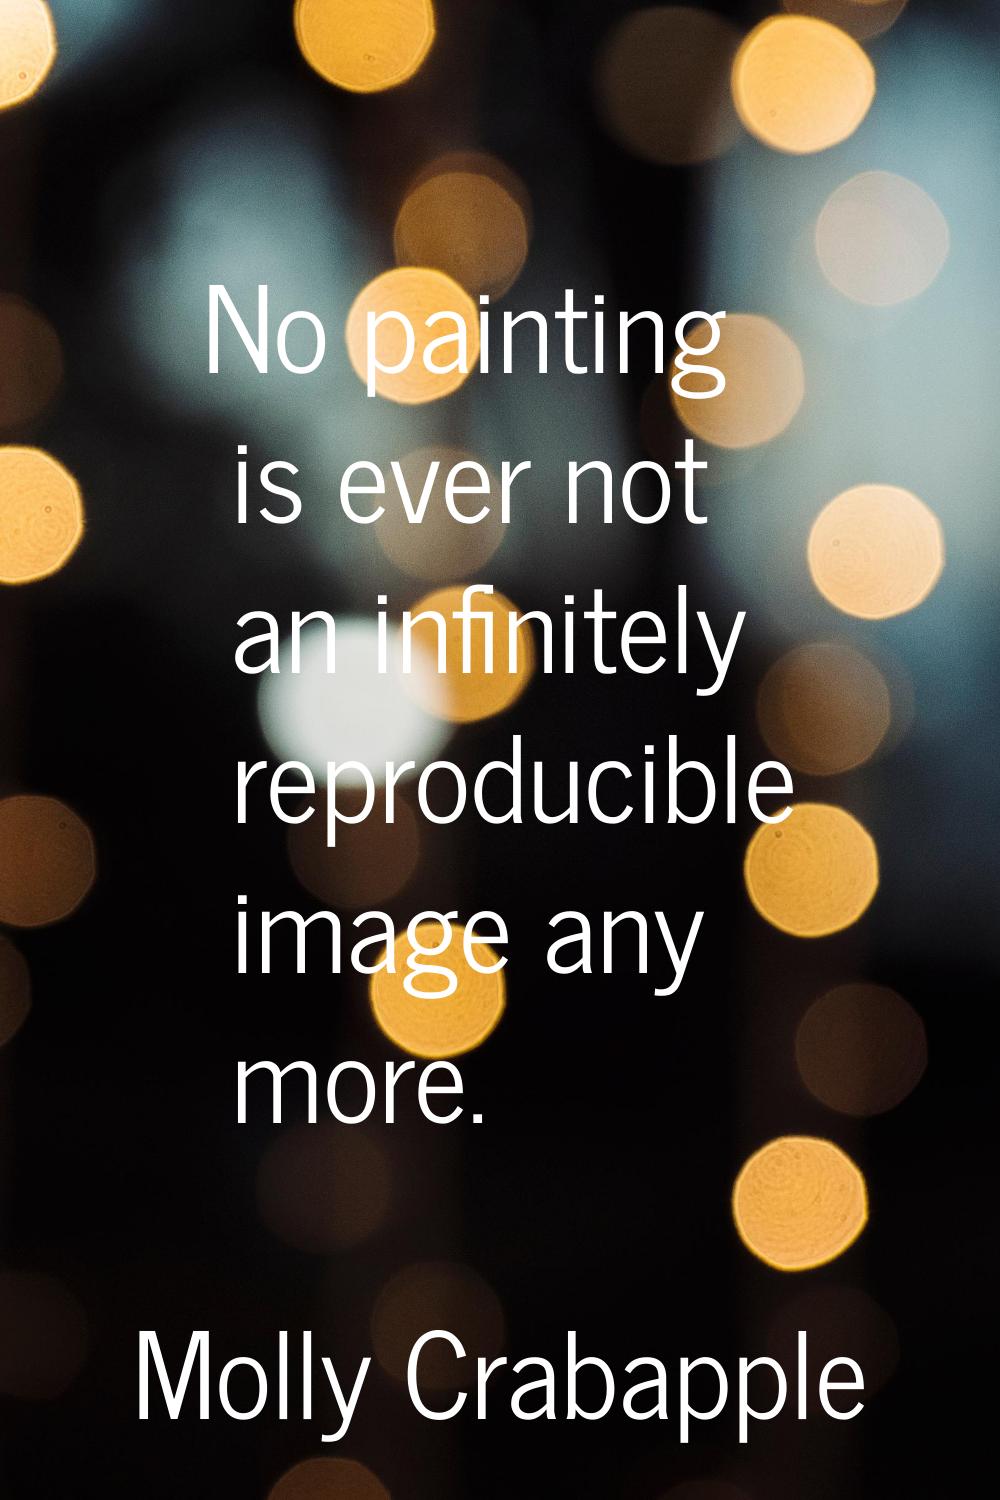 No painting is ever not an infinitely reproducible image any more.